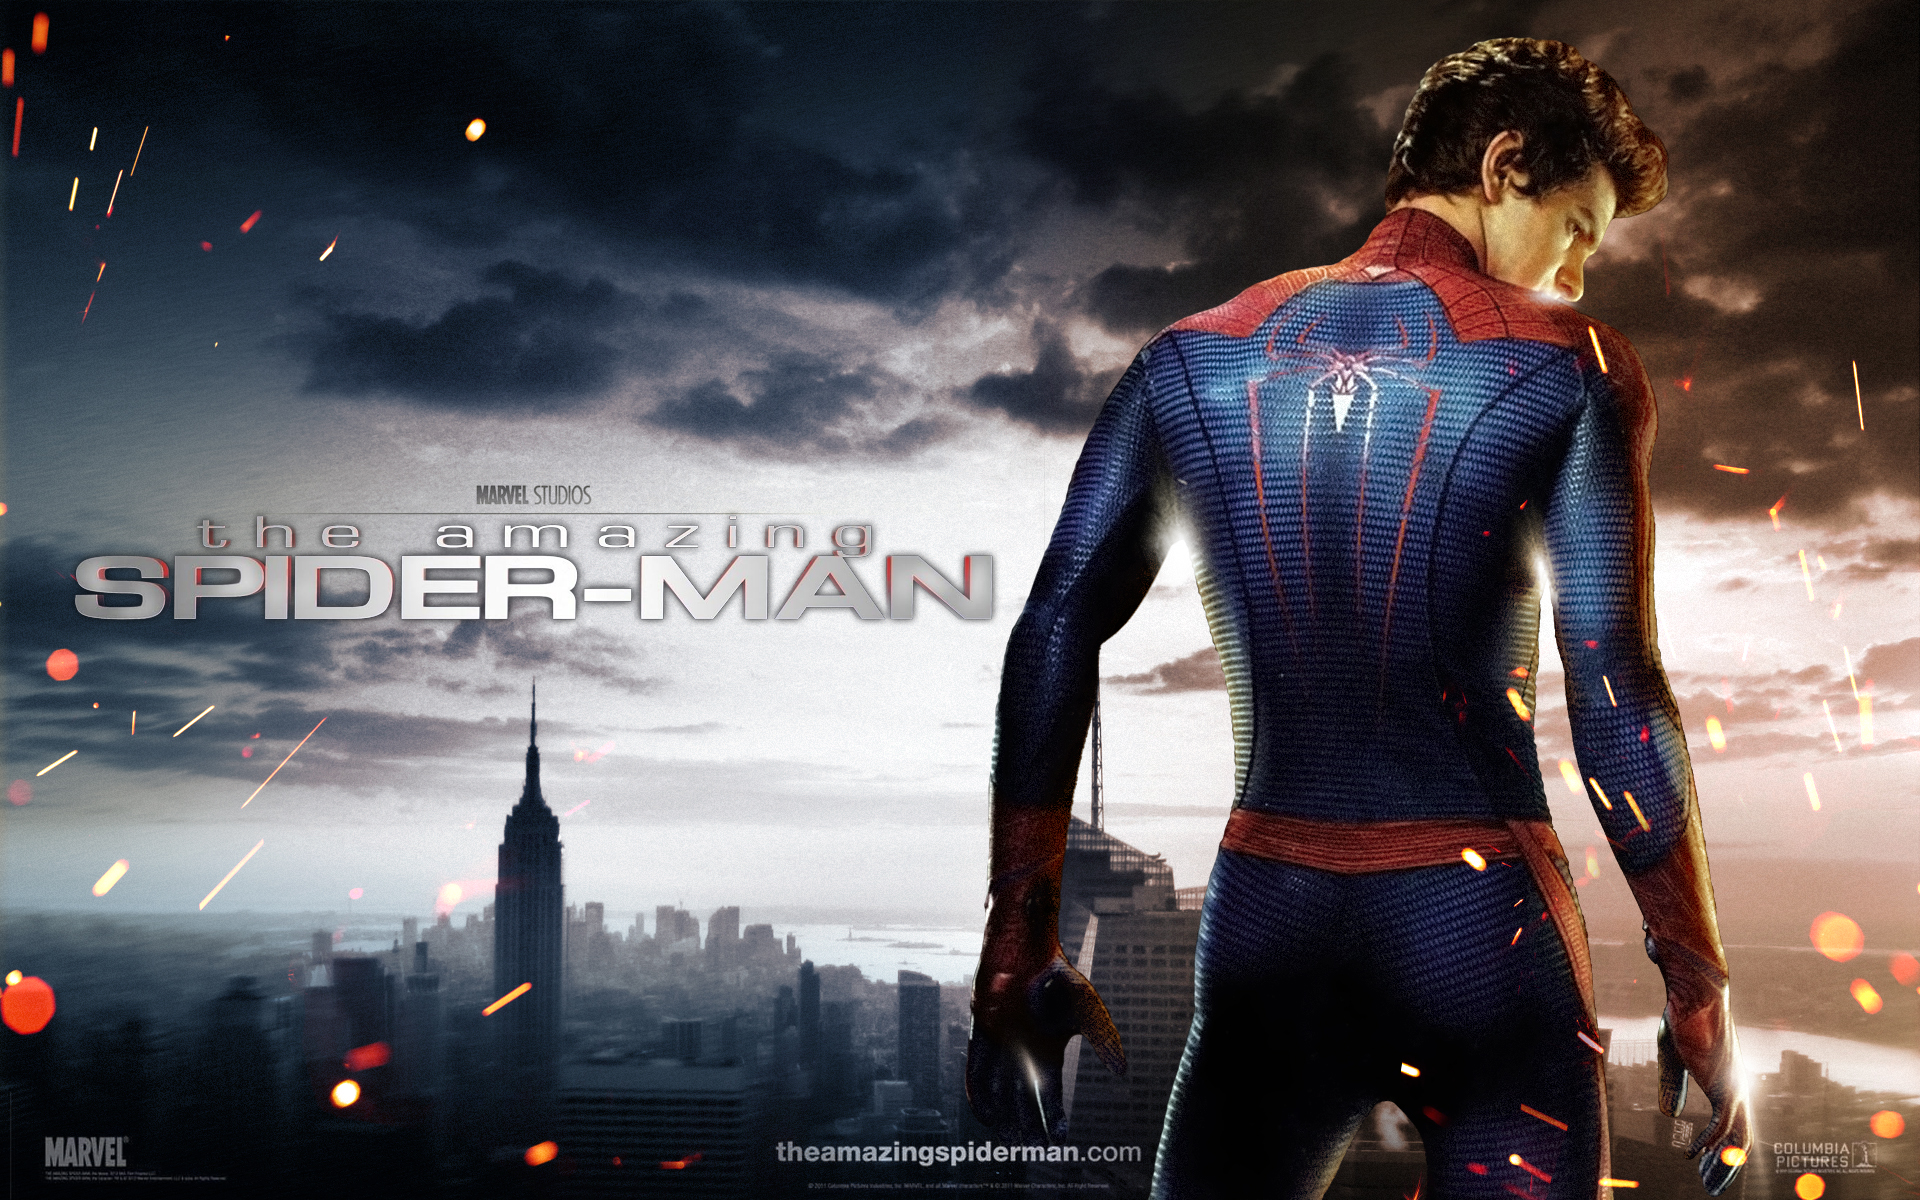 spiderman cell phone wall paper html in benedictpacifico github com source code search engine